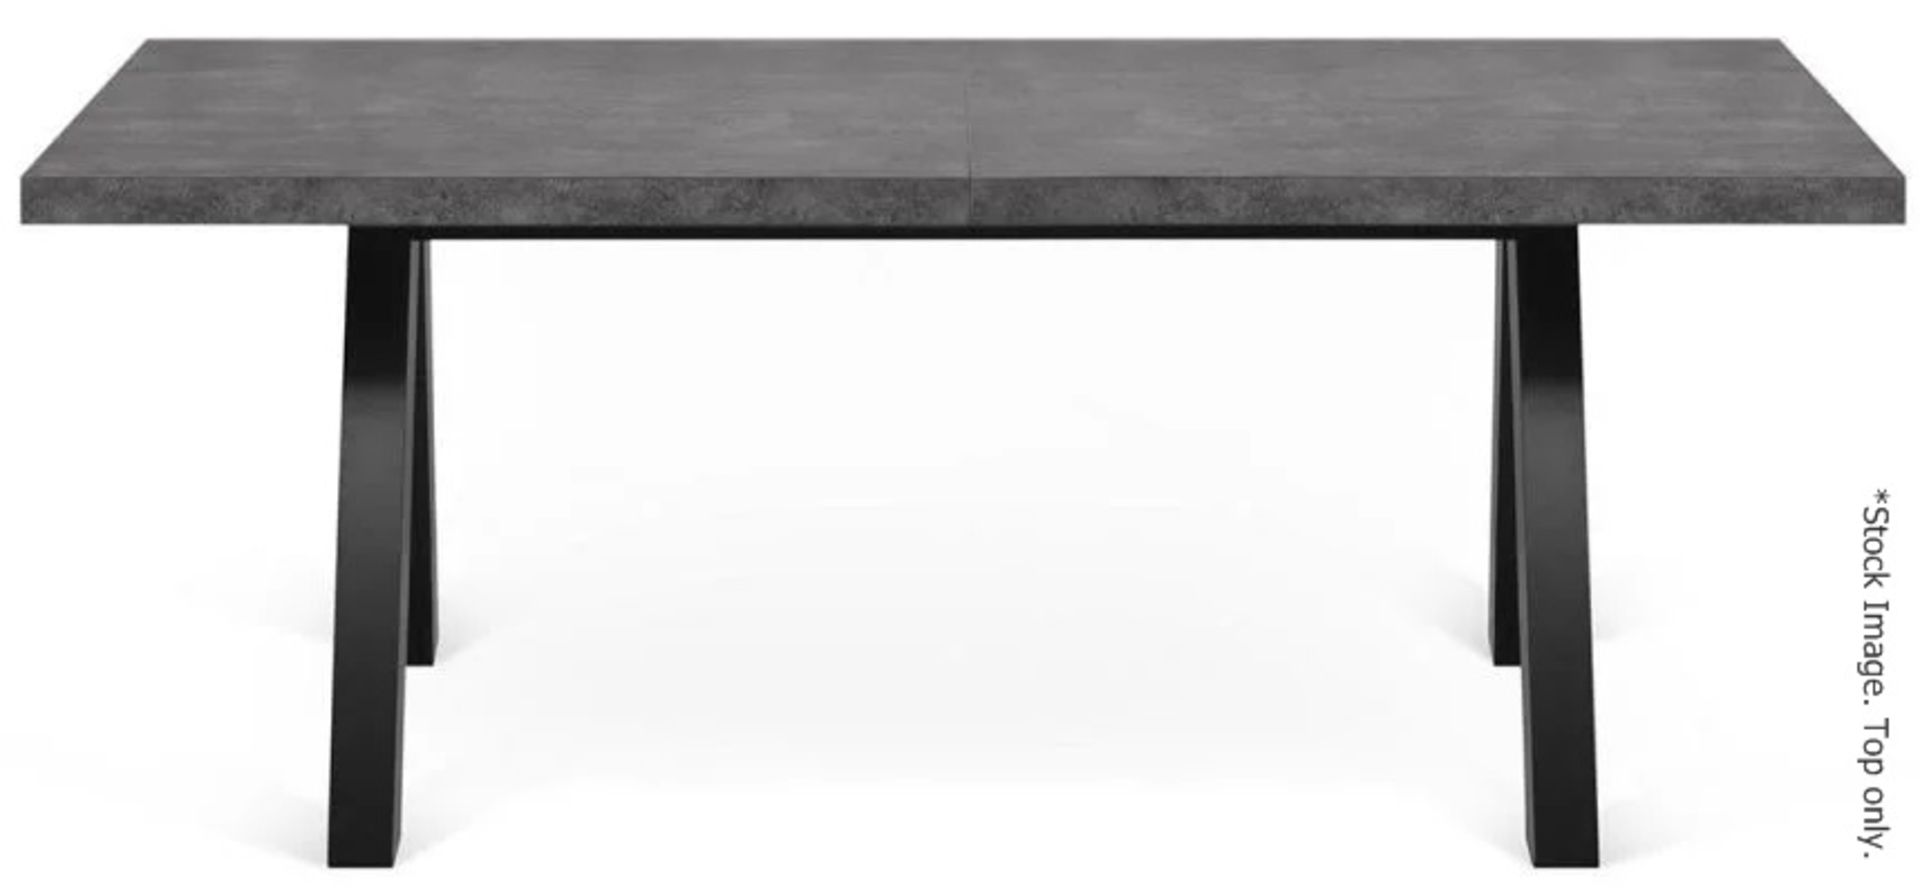 1 x Temahome 'Apex' Concrete-style and Black Extending Dining Table Top (No Base) - Dimensions: - Image 2 of 6